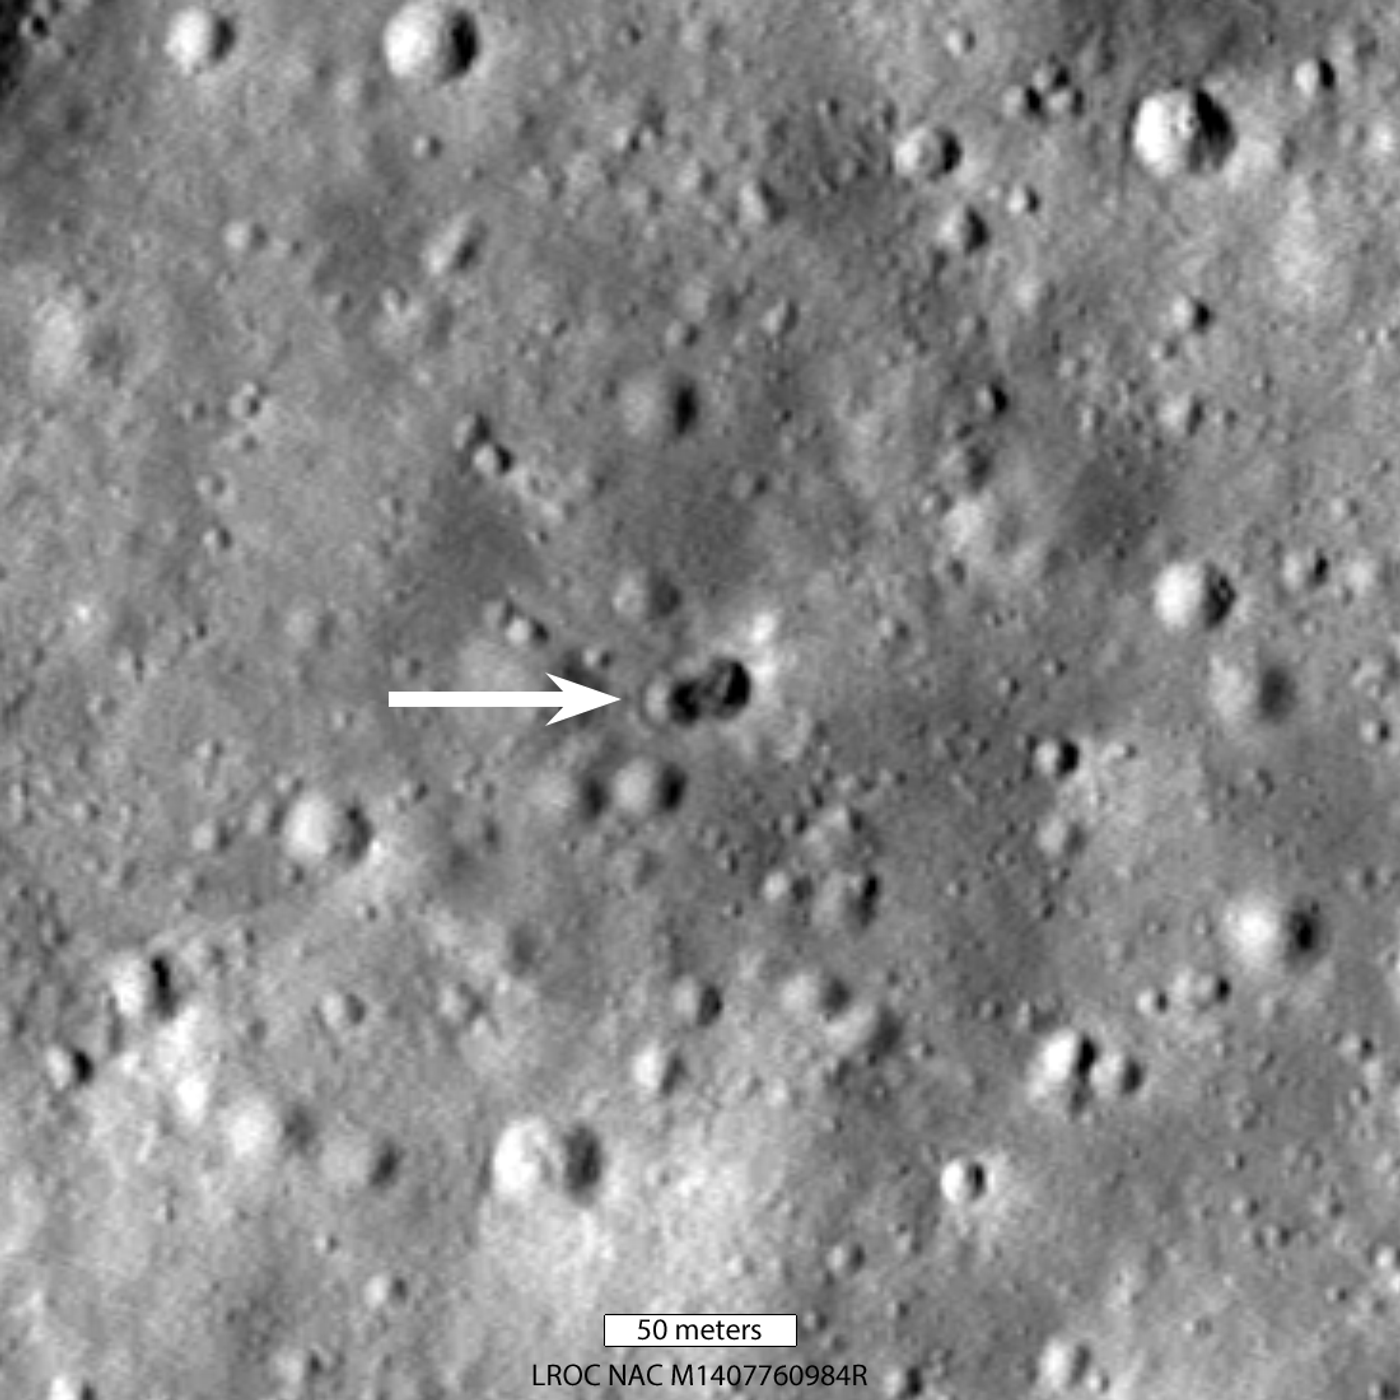 The crater created by a rocket body impacting the Moon, as indicated by the arrow. Credit: NASA/Goddard/Arizona State University